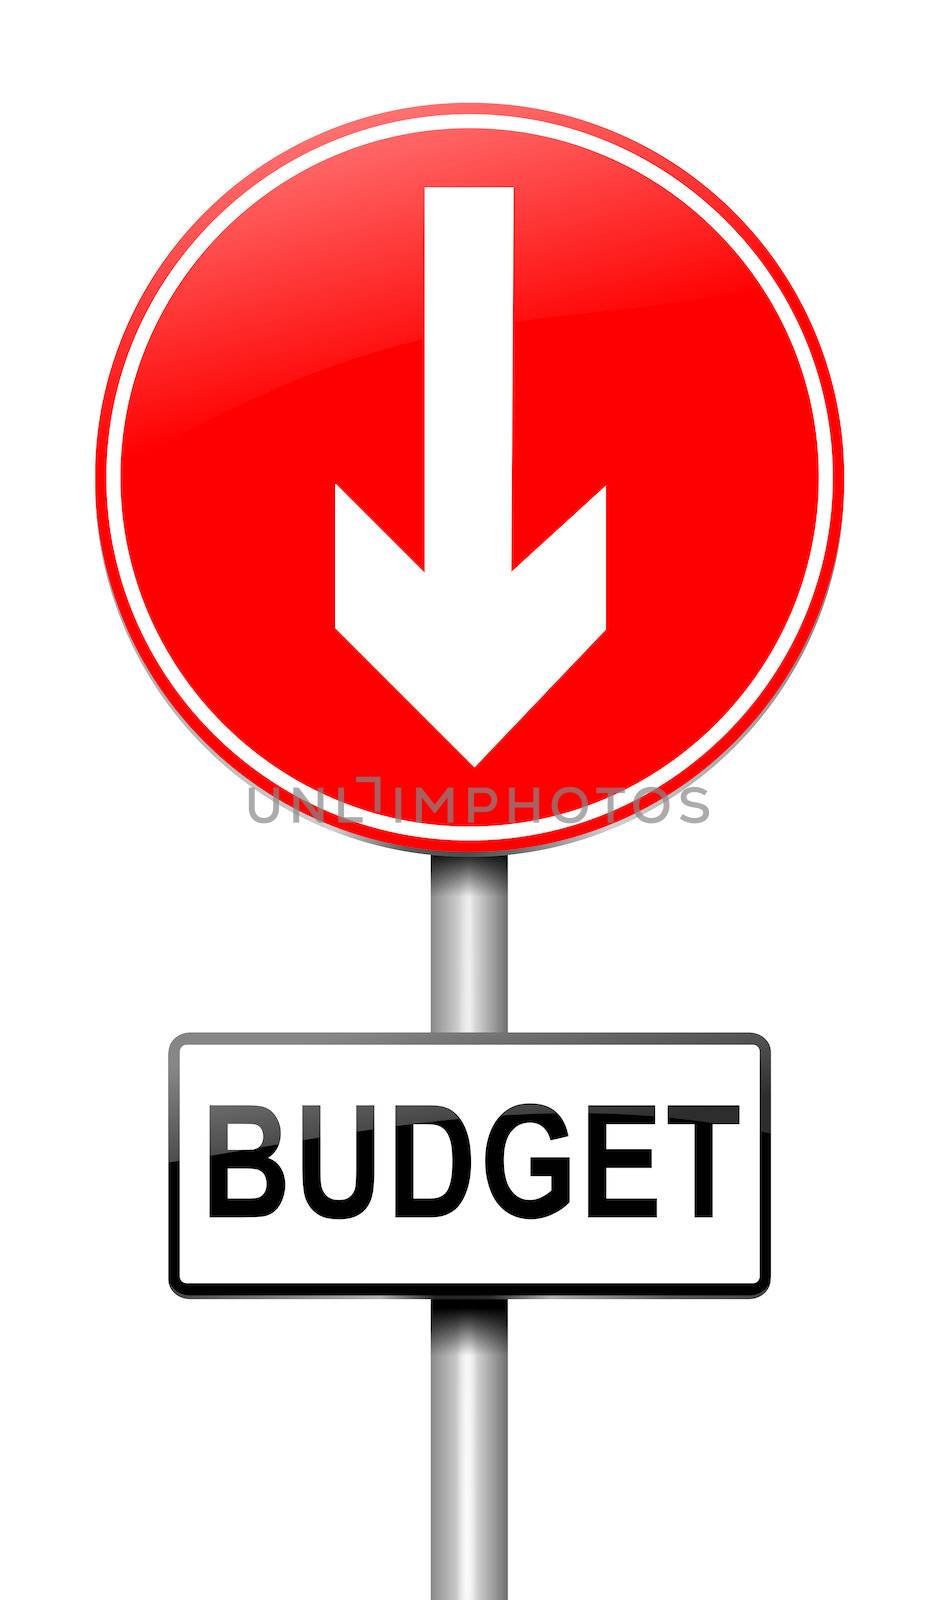 Illustration depicting a roadsign with a budget concept. White background.